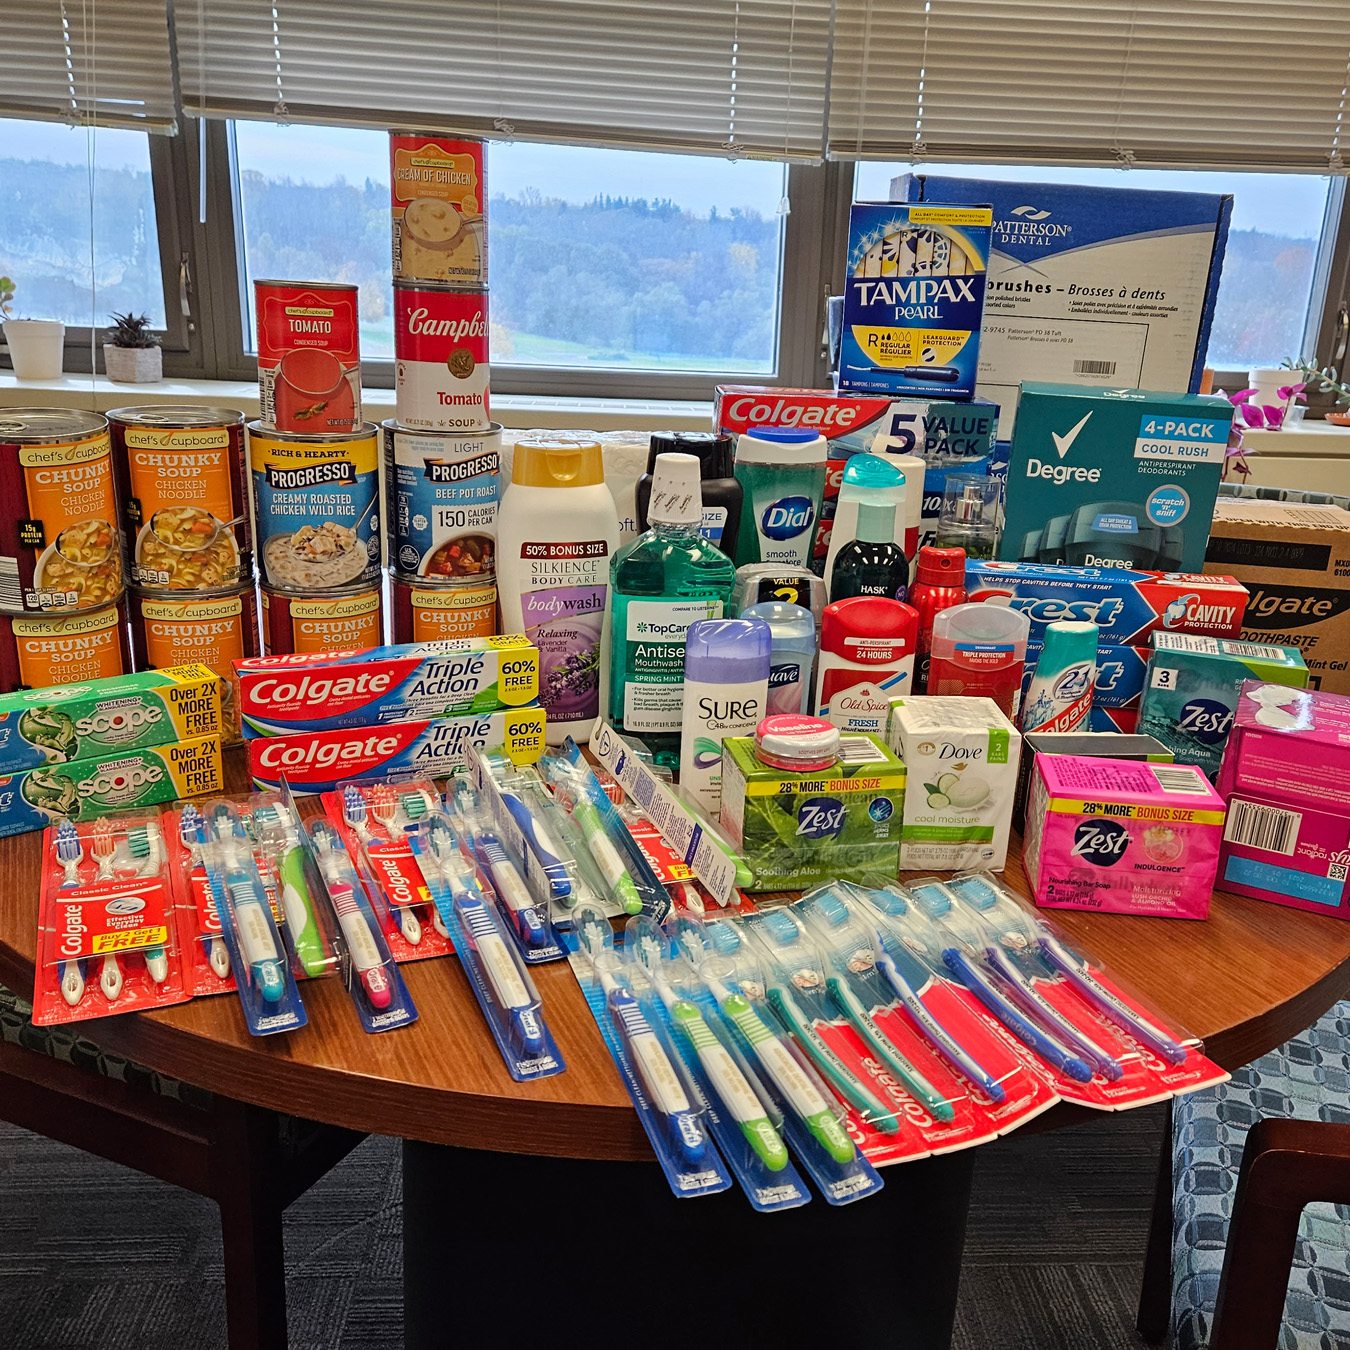 Generous donations from the Office of the Dean of Students to the Food Pantry, featuring canned goods, dental supplies, toiletries, and more.